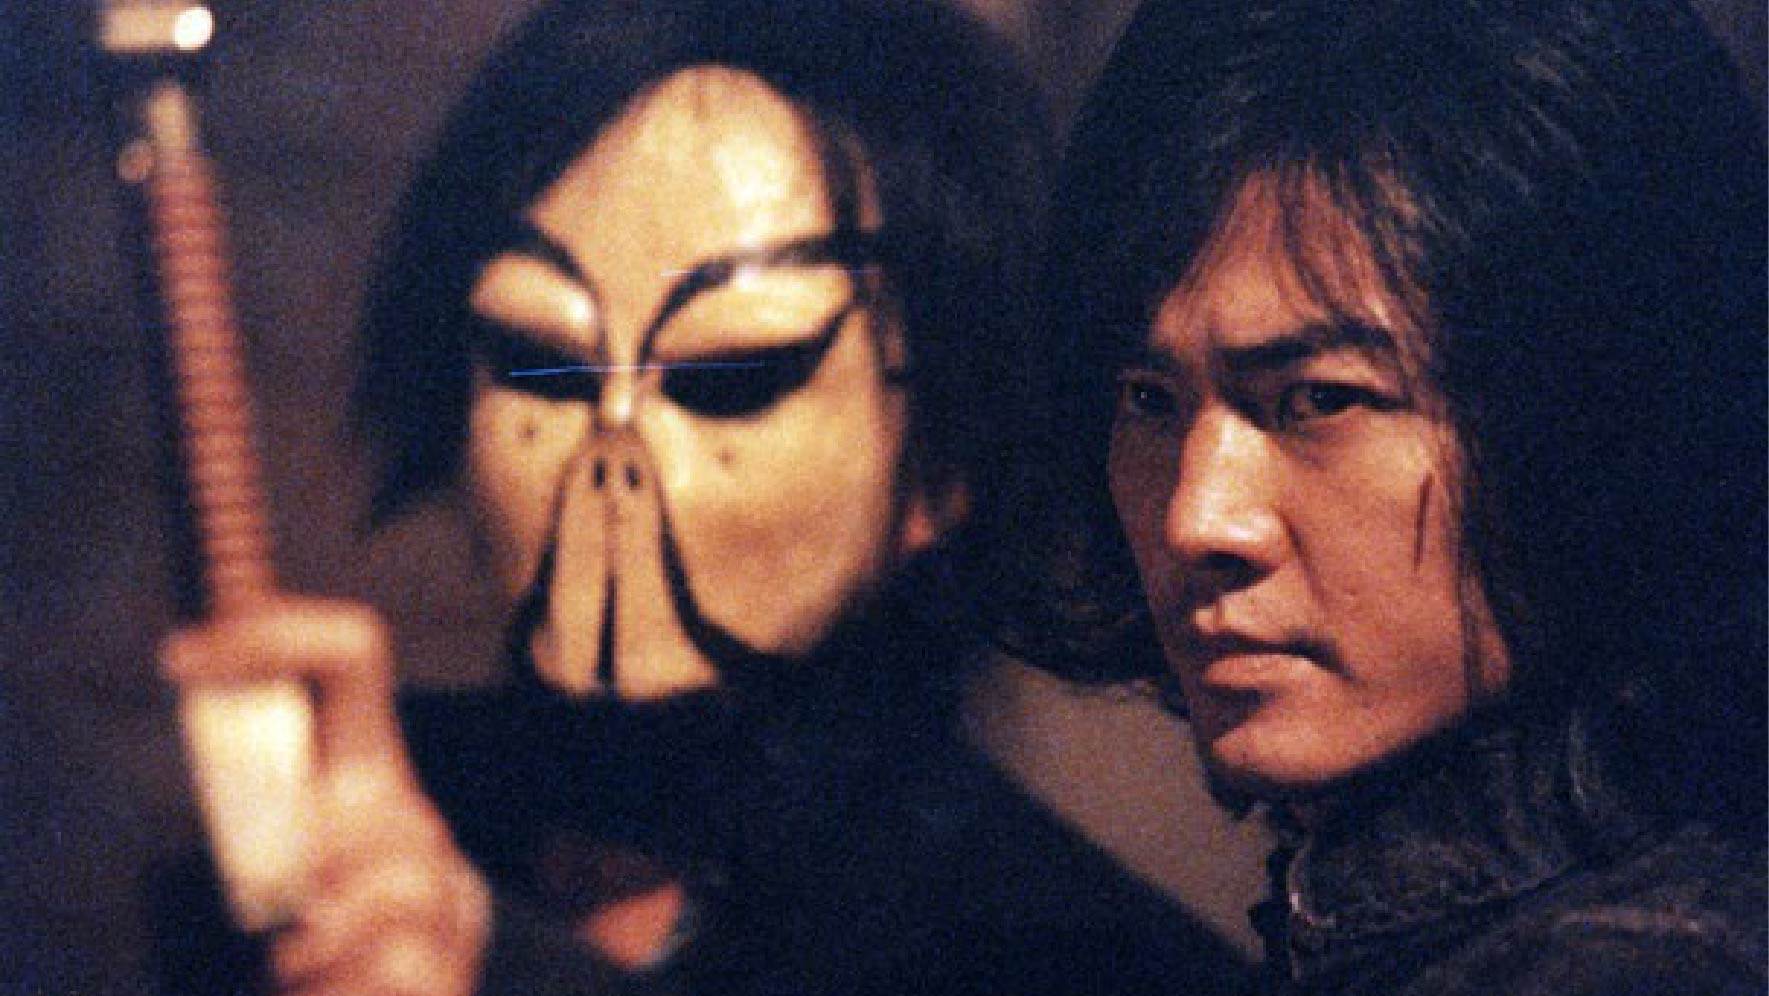 Ekin Cheng in a still from “A Man Called Hero”. The 1999 martial arts film from Infernal Affairs director Andrew Lau did not match the success of his previous effort, The Storm Riders, which was a bit hit at the Hong Kong box office.